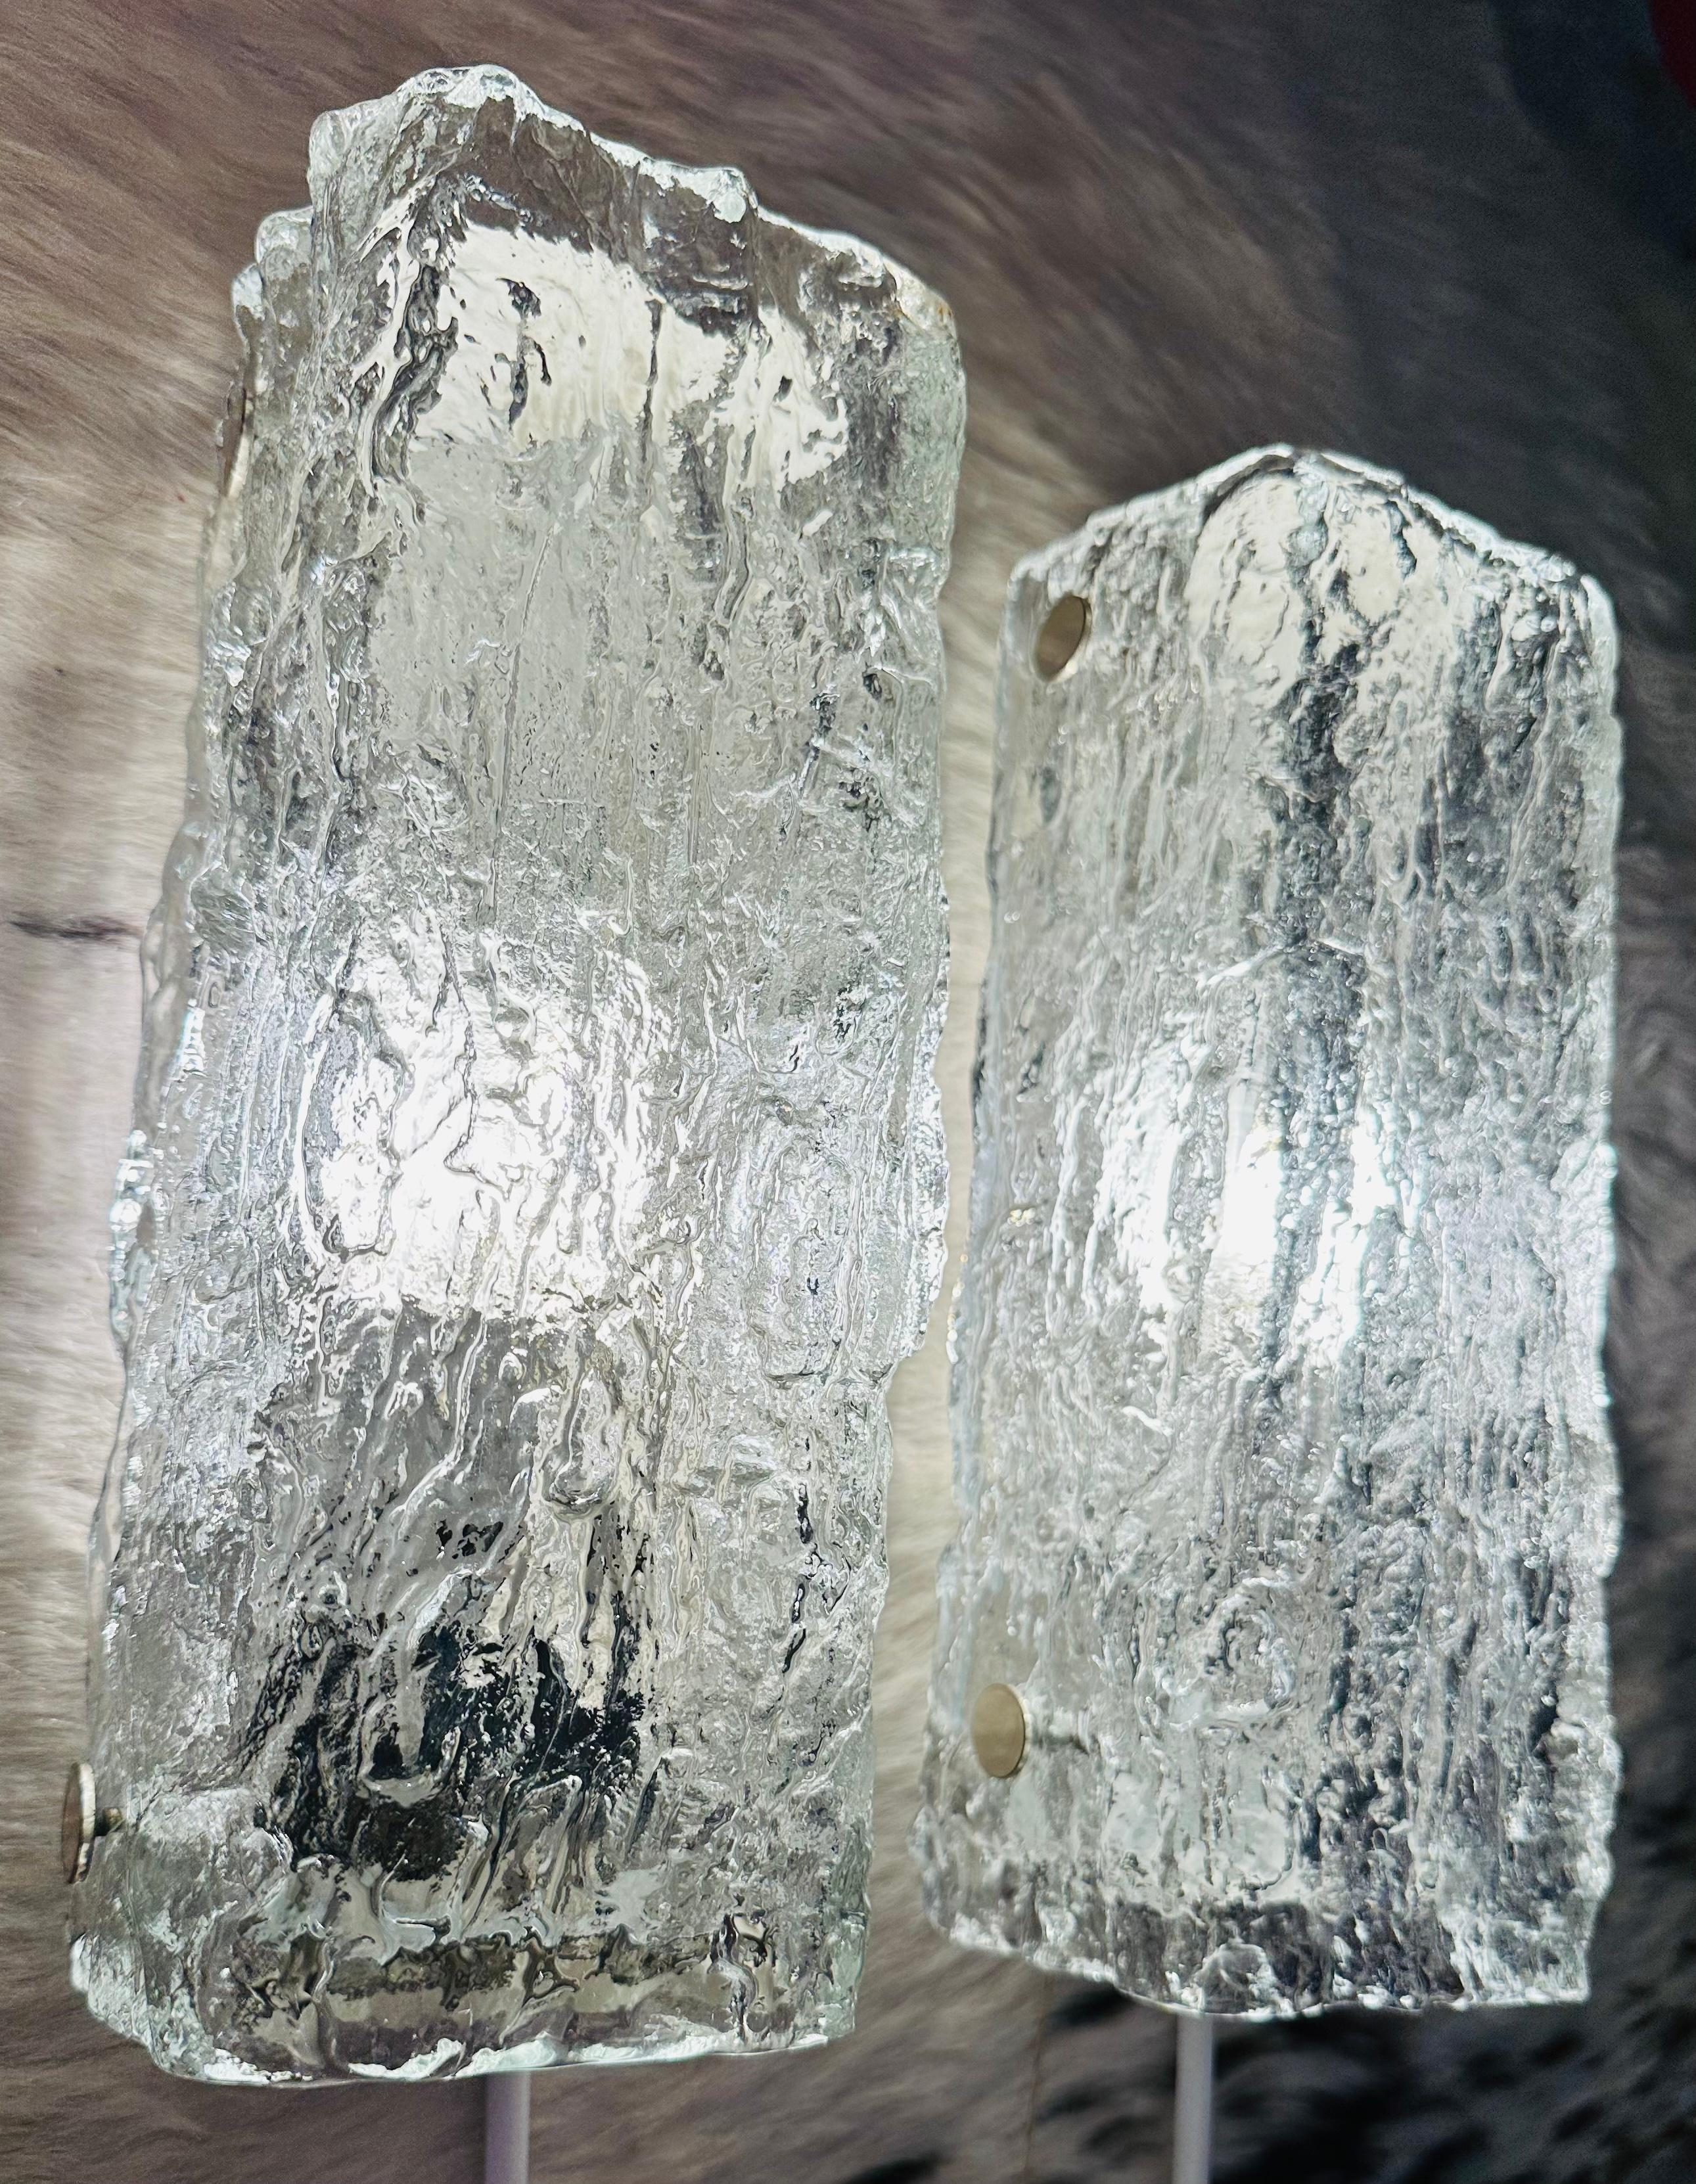 Pair of small 1970s iced-glass textured wall sconces or wall lights manufactured by the upmarket German light manufacturer Kaiser Leuchten. The rectangular thick textured glass screws onto a white lacquered metal frame which is easily screwed into